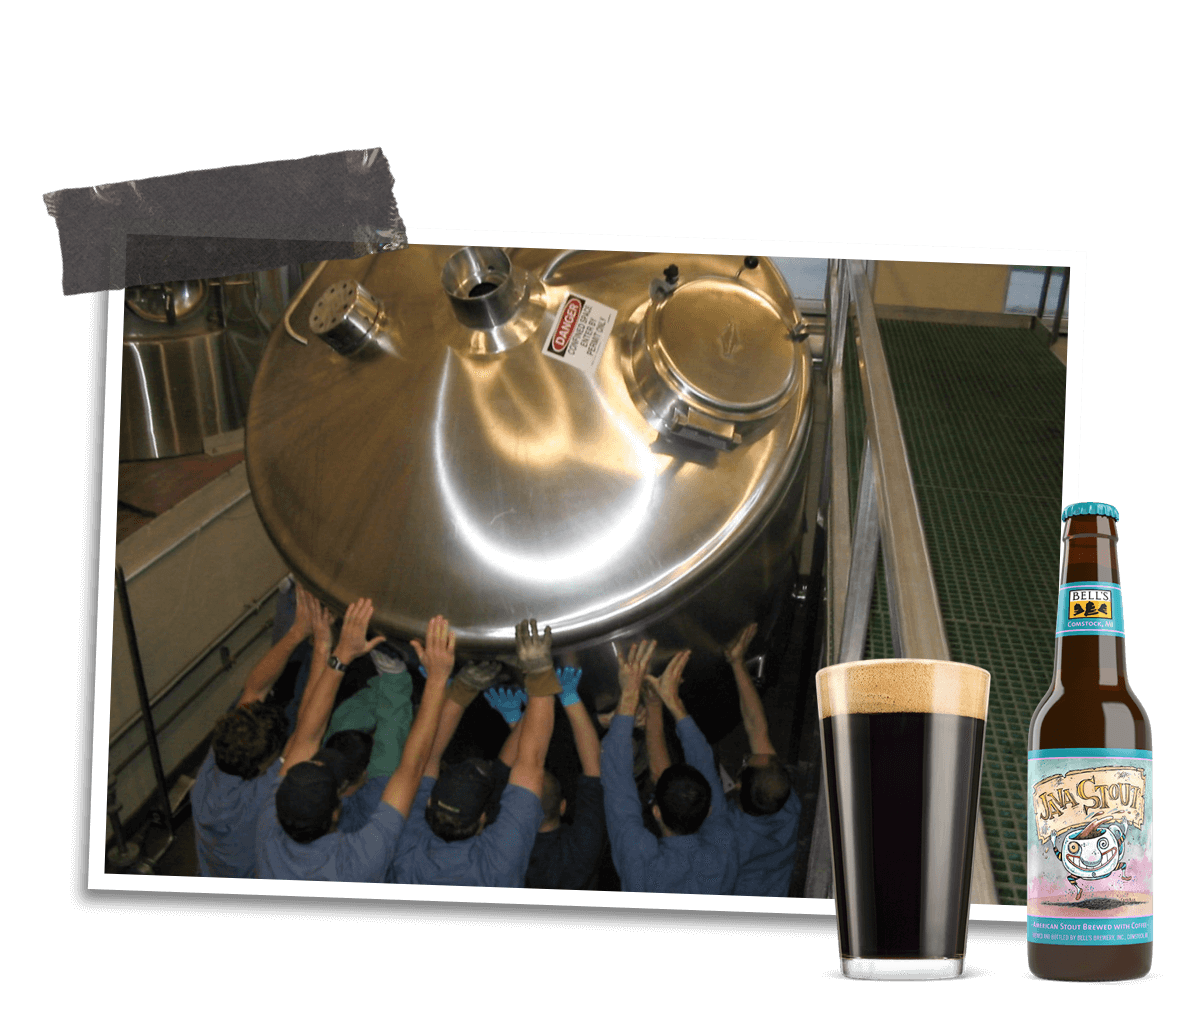 A photo of a brewing tank being moved, a bottle of java stout